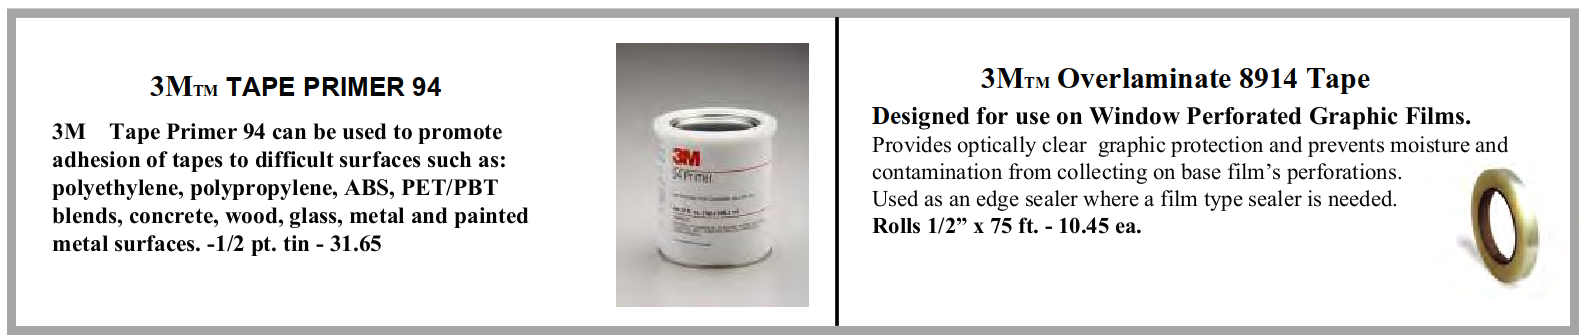 adhesives apr 22 2 - Adhesives - Spray, Cement, Tape